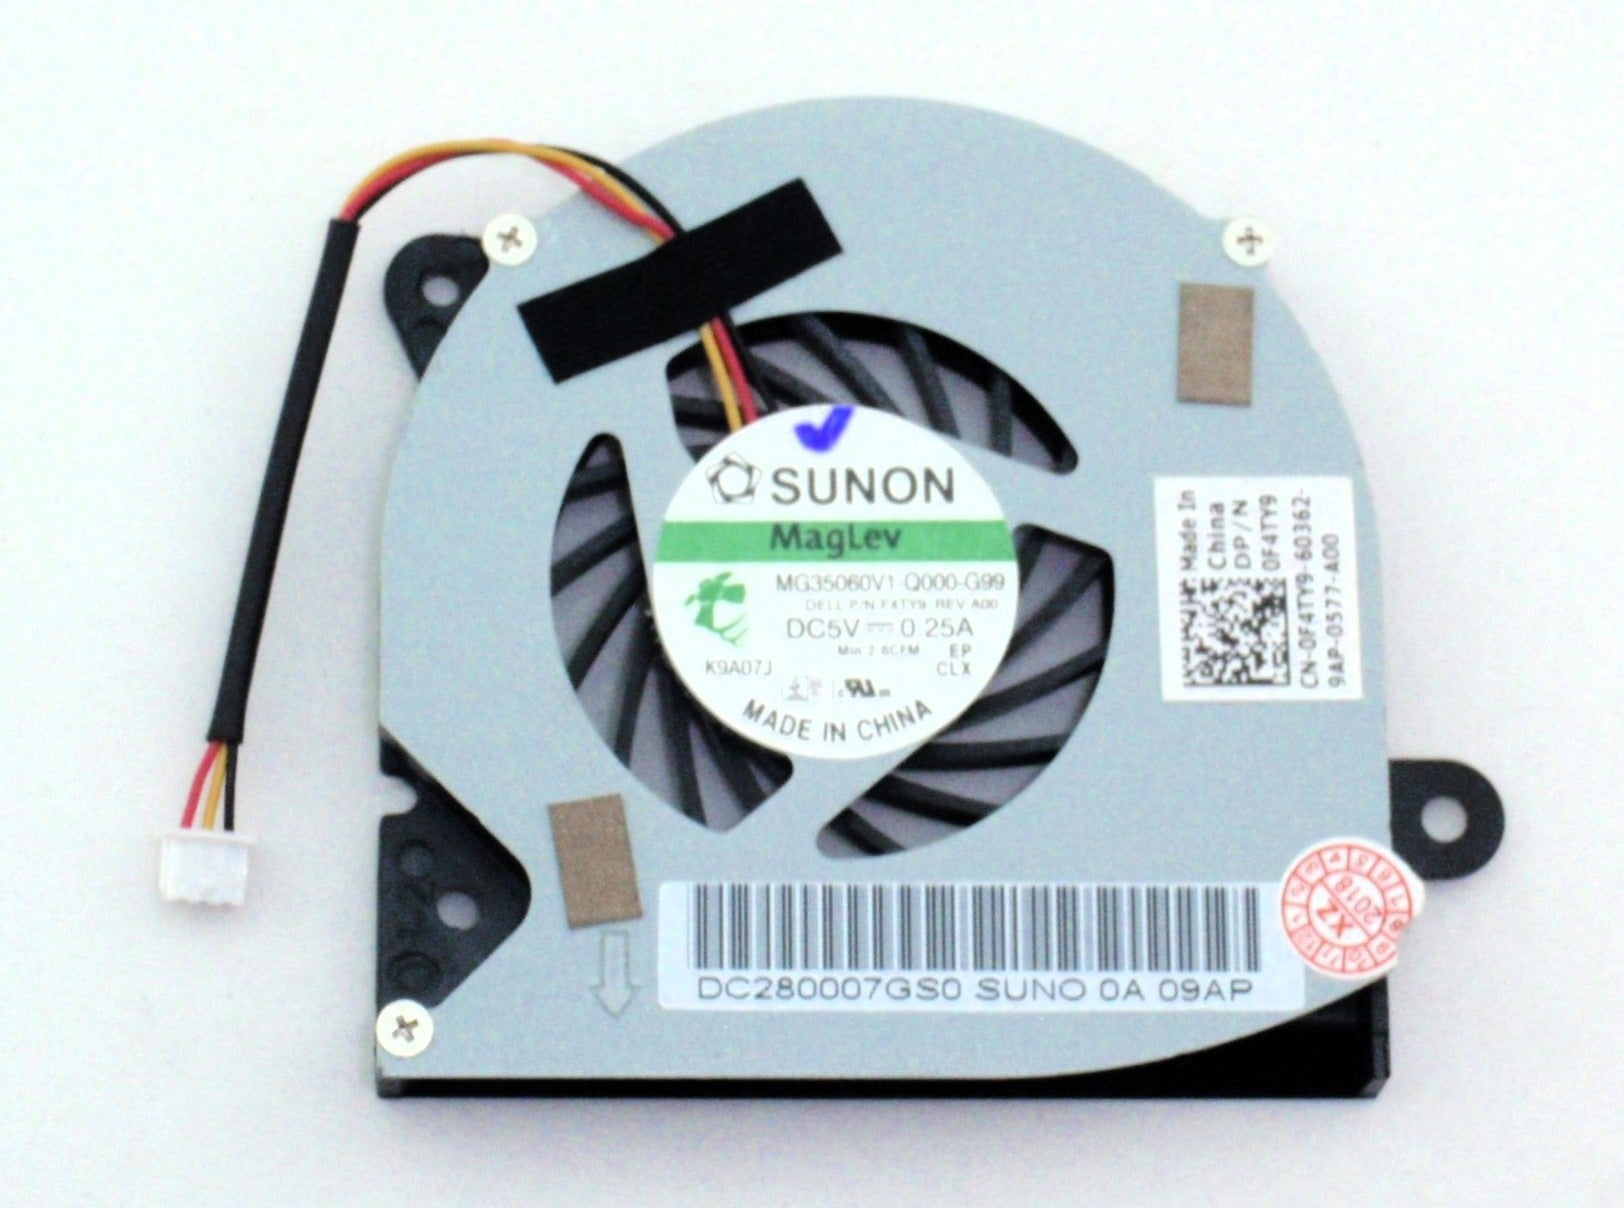 Dell New CPU Cooling Fan Inspiron 11z 1110 DC280007GS0 MG35060V1-Q000-G99 0F4TY9 F4TY9